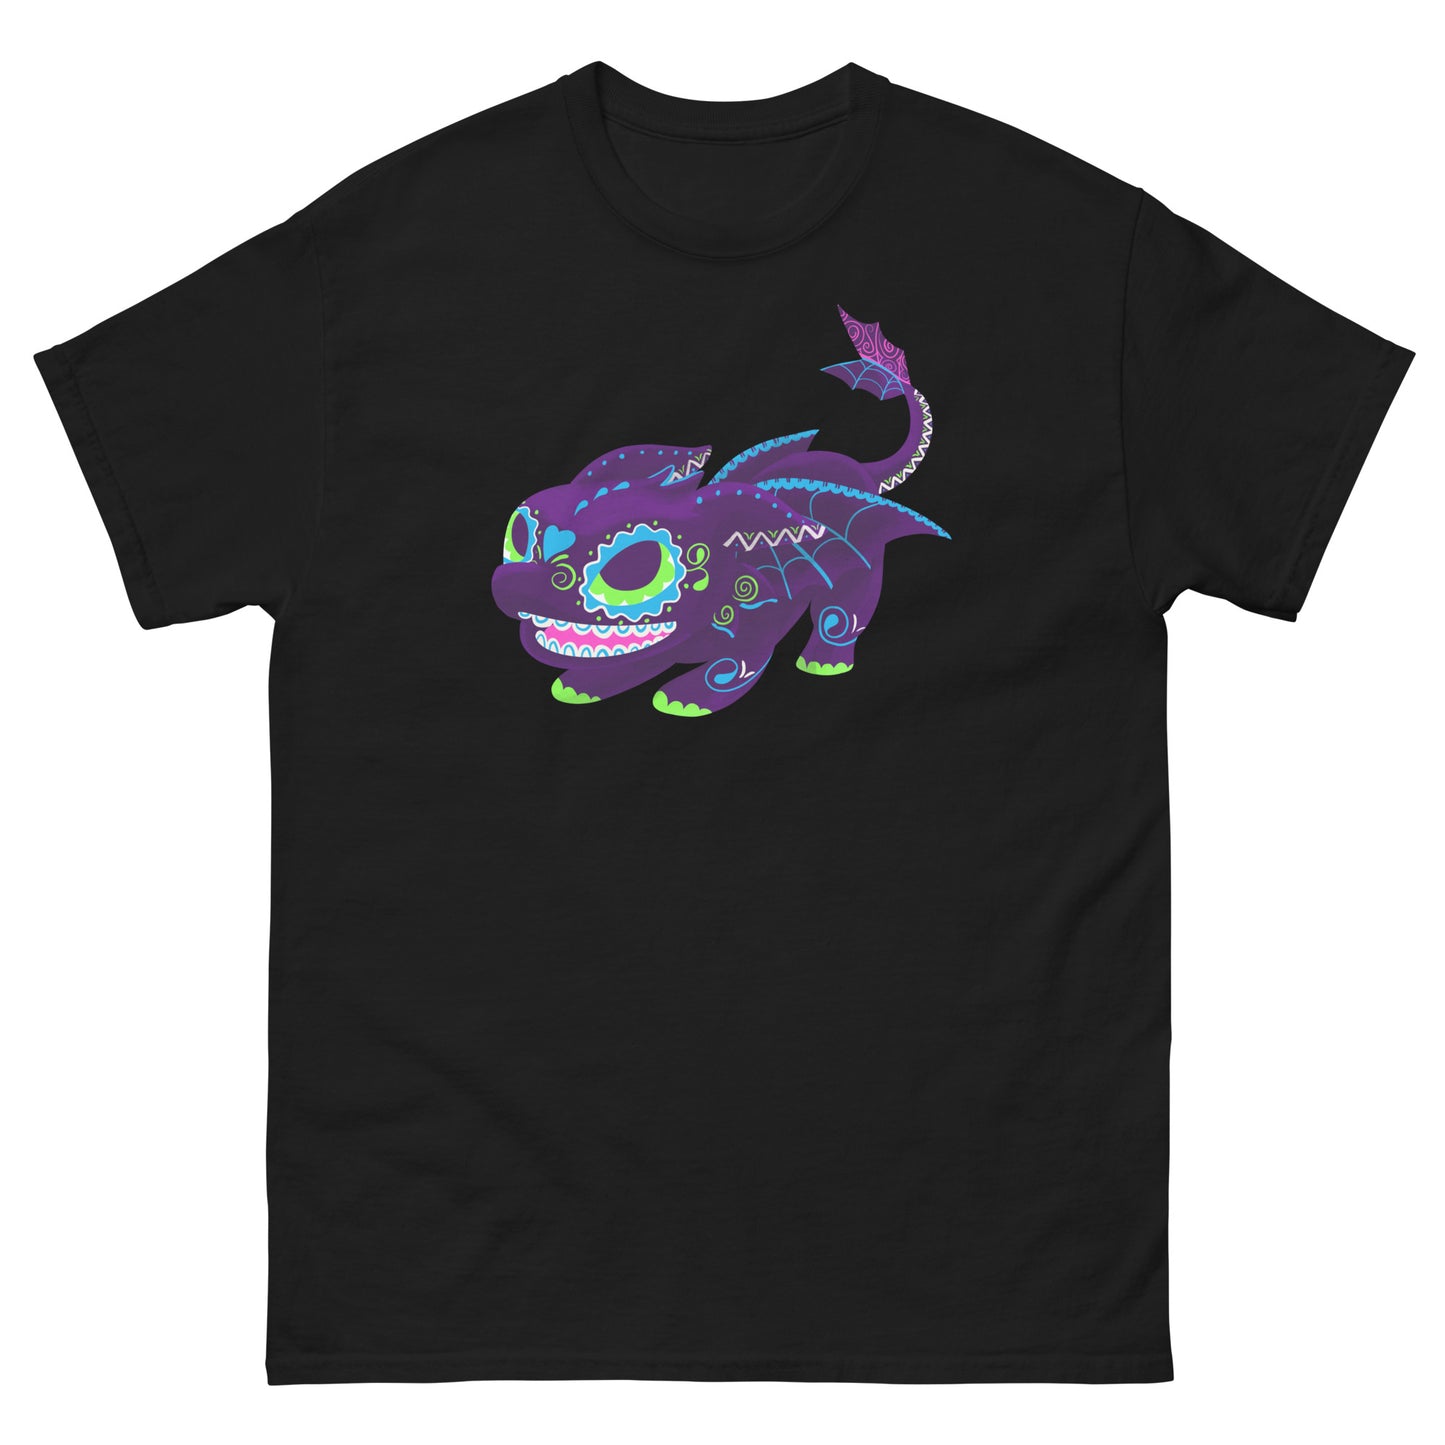 Toothless How to Train Your Dragon - PopMuertos Sugar Skull - T-Shirt